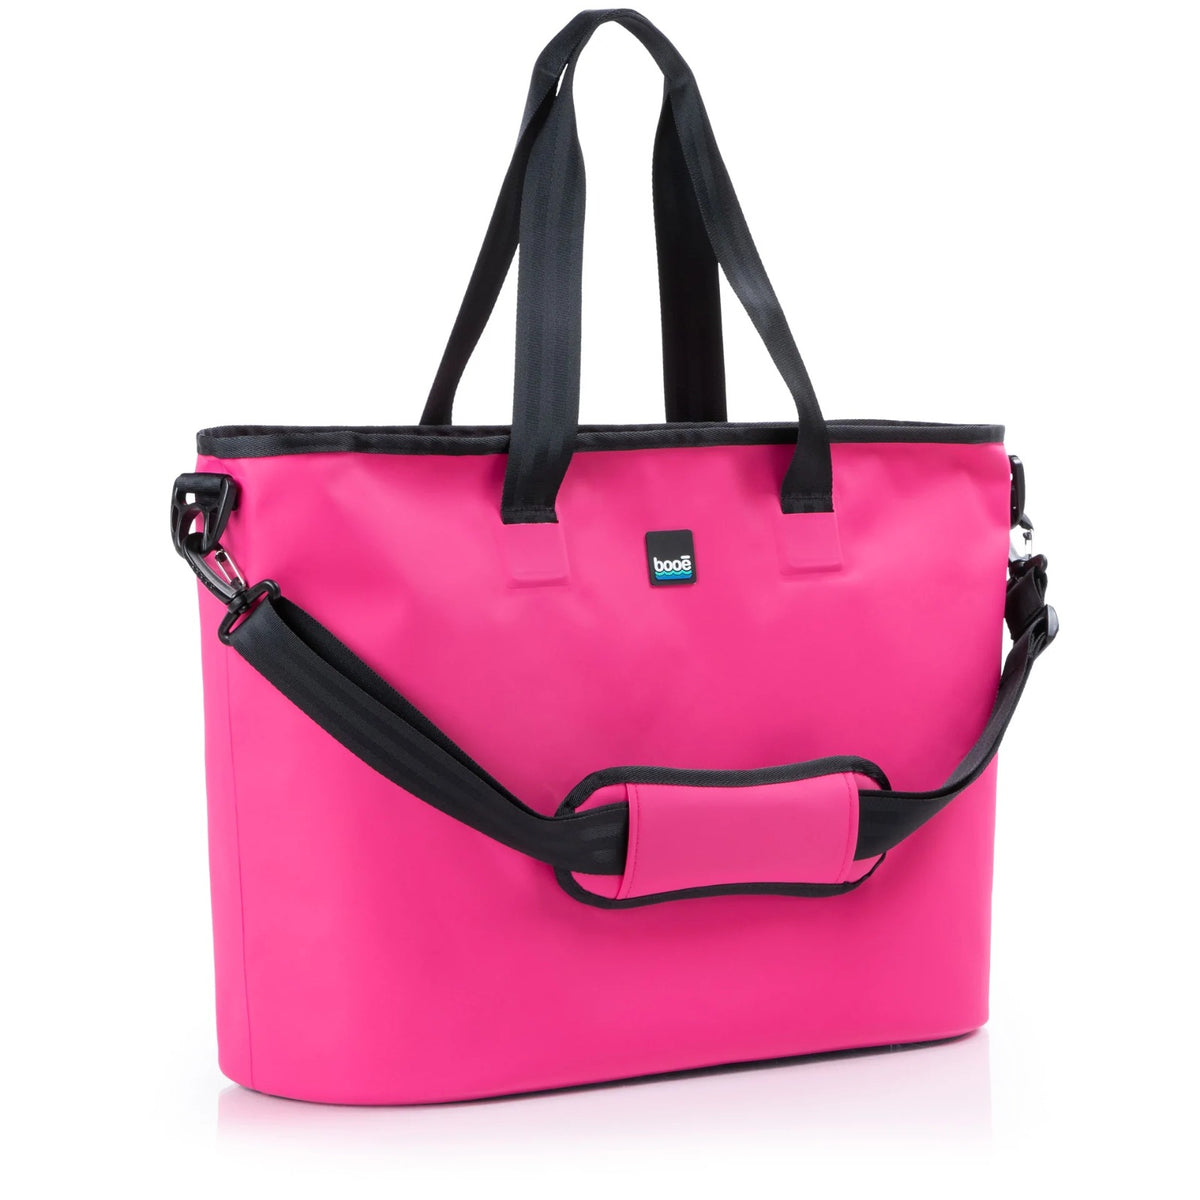 30L Waterproof Insulated Tote